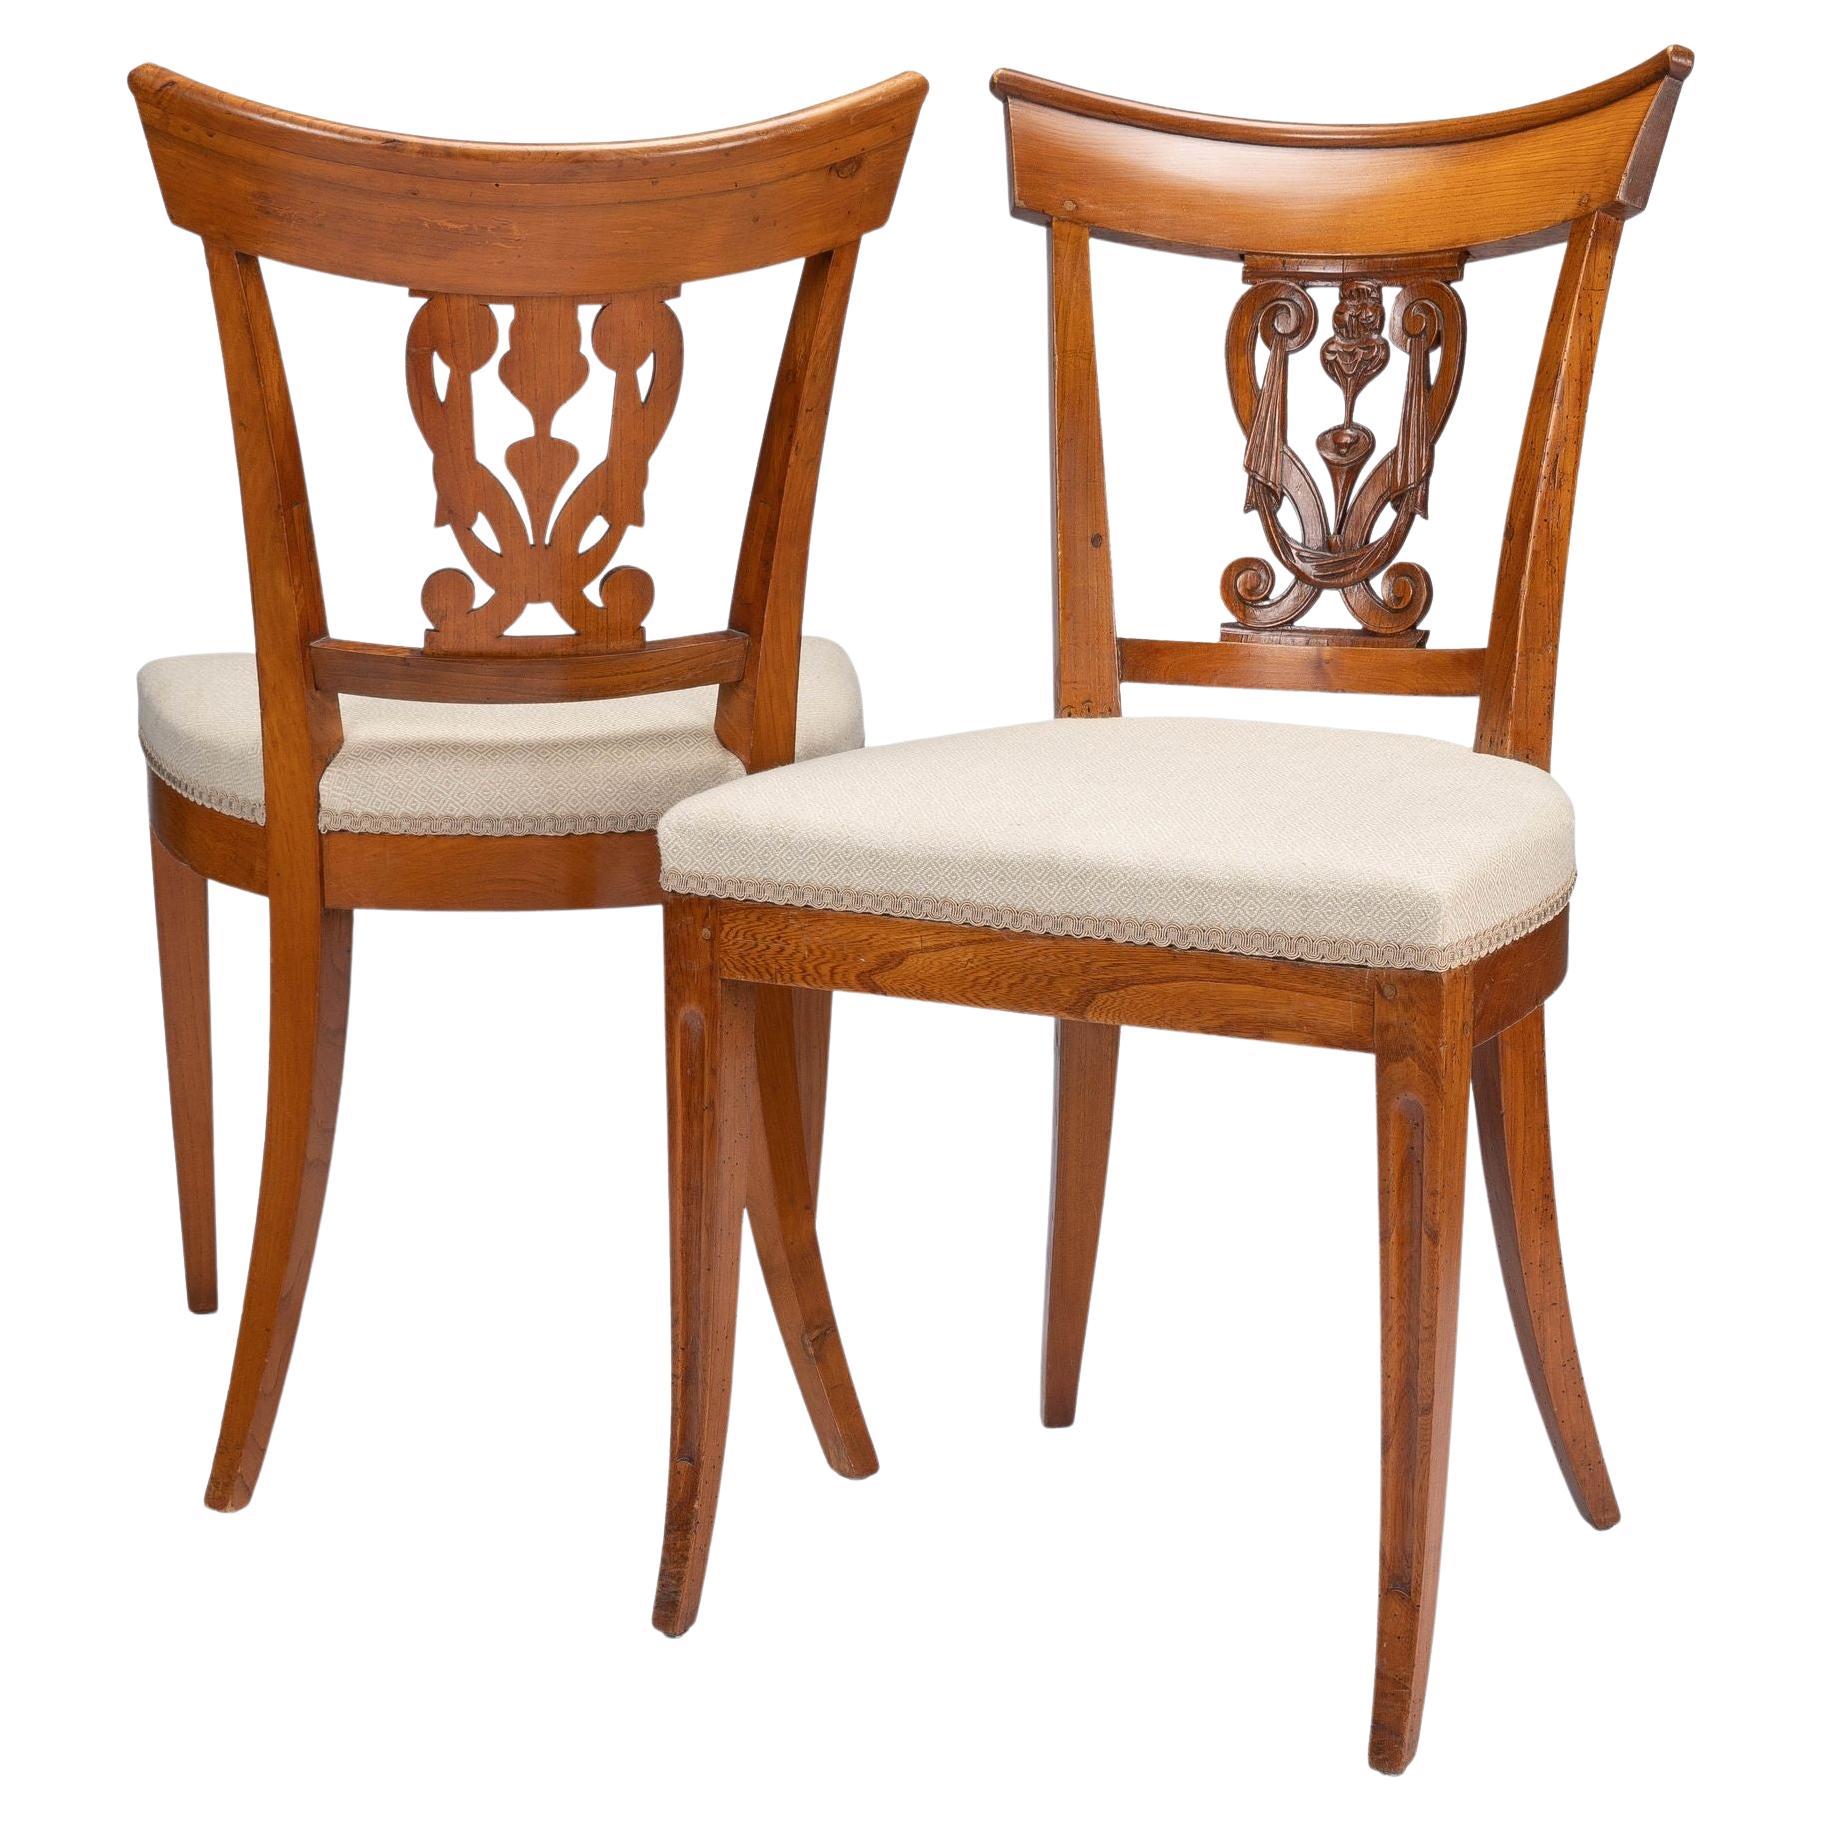 Pair of French Neoclassic Upholstered Seat Side Chairs, c. 1795-1810